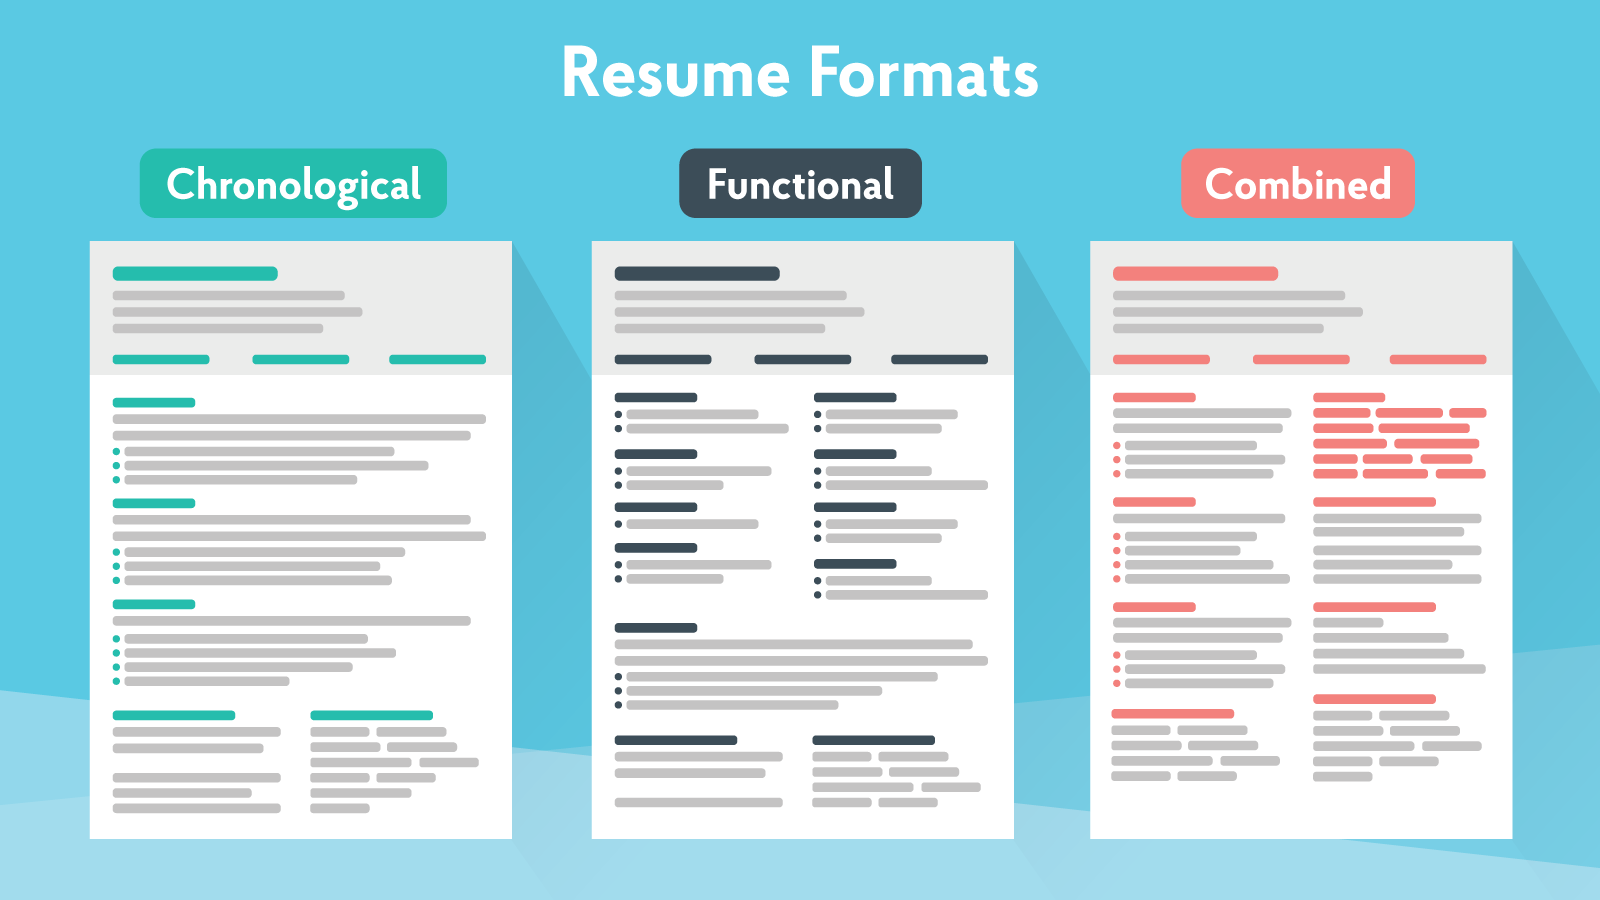 Resume Formats Guide: How to Pick the Best in 2018